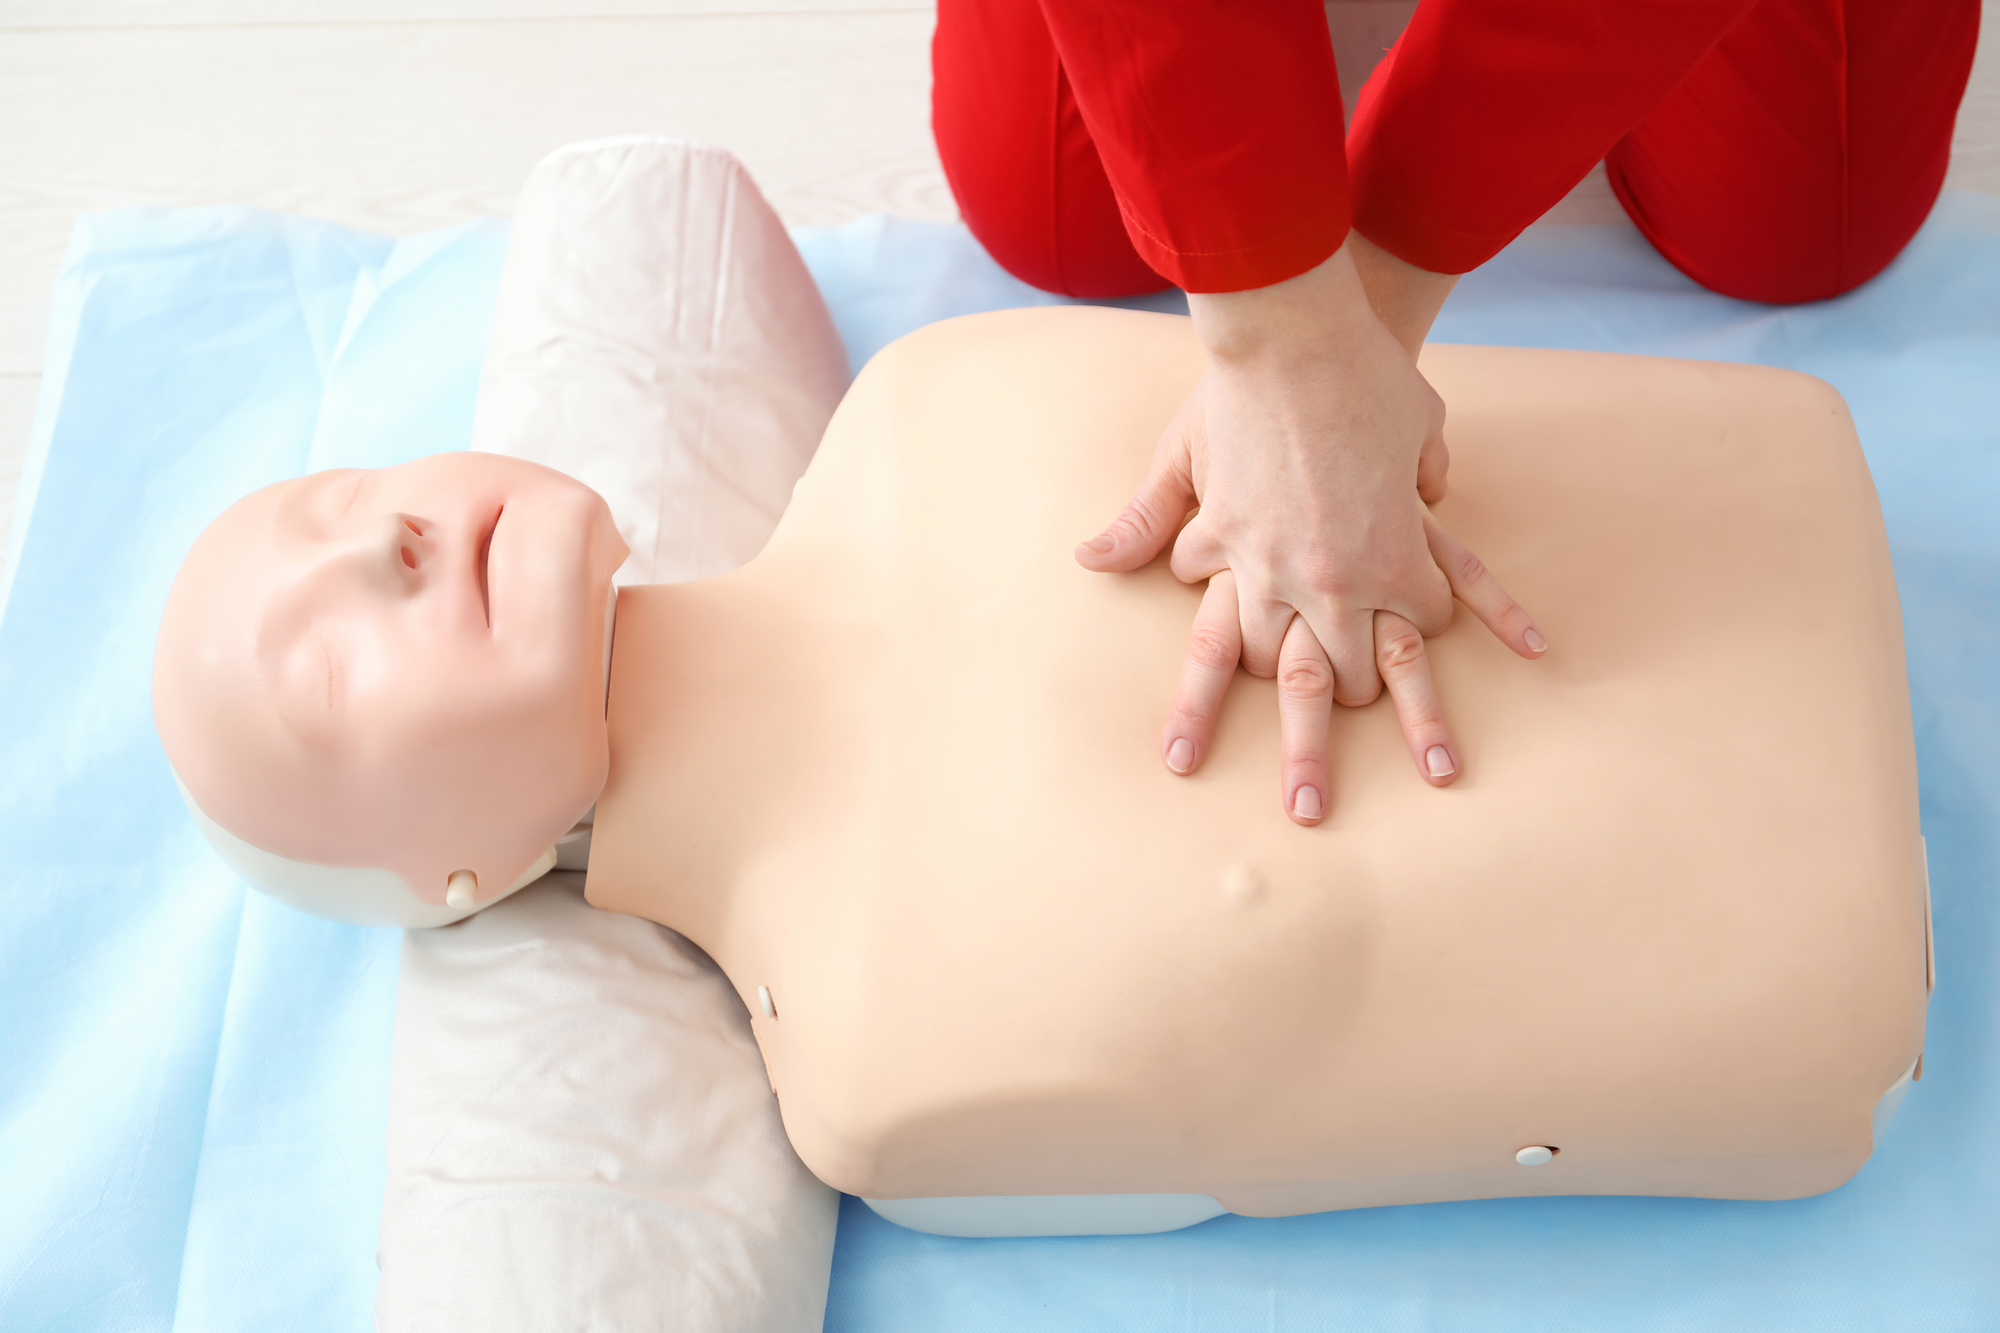 Women are less likely to receive CPR—but why?